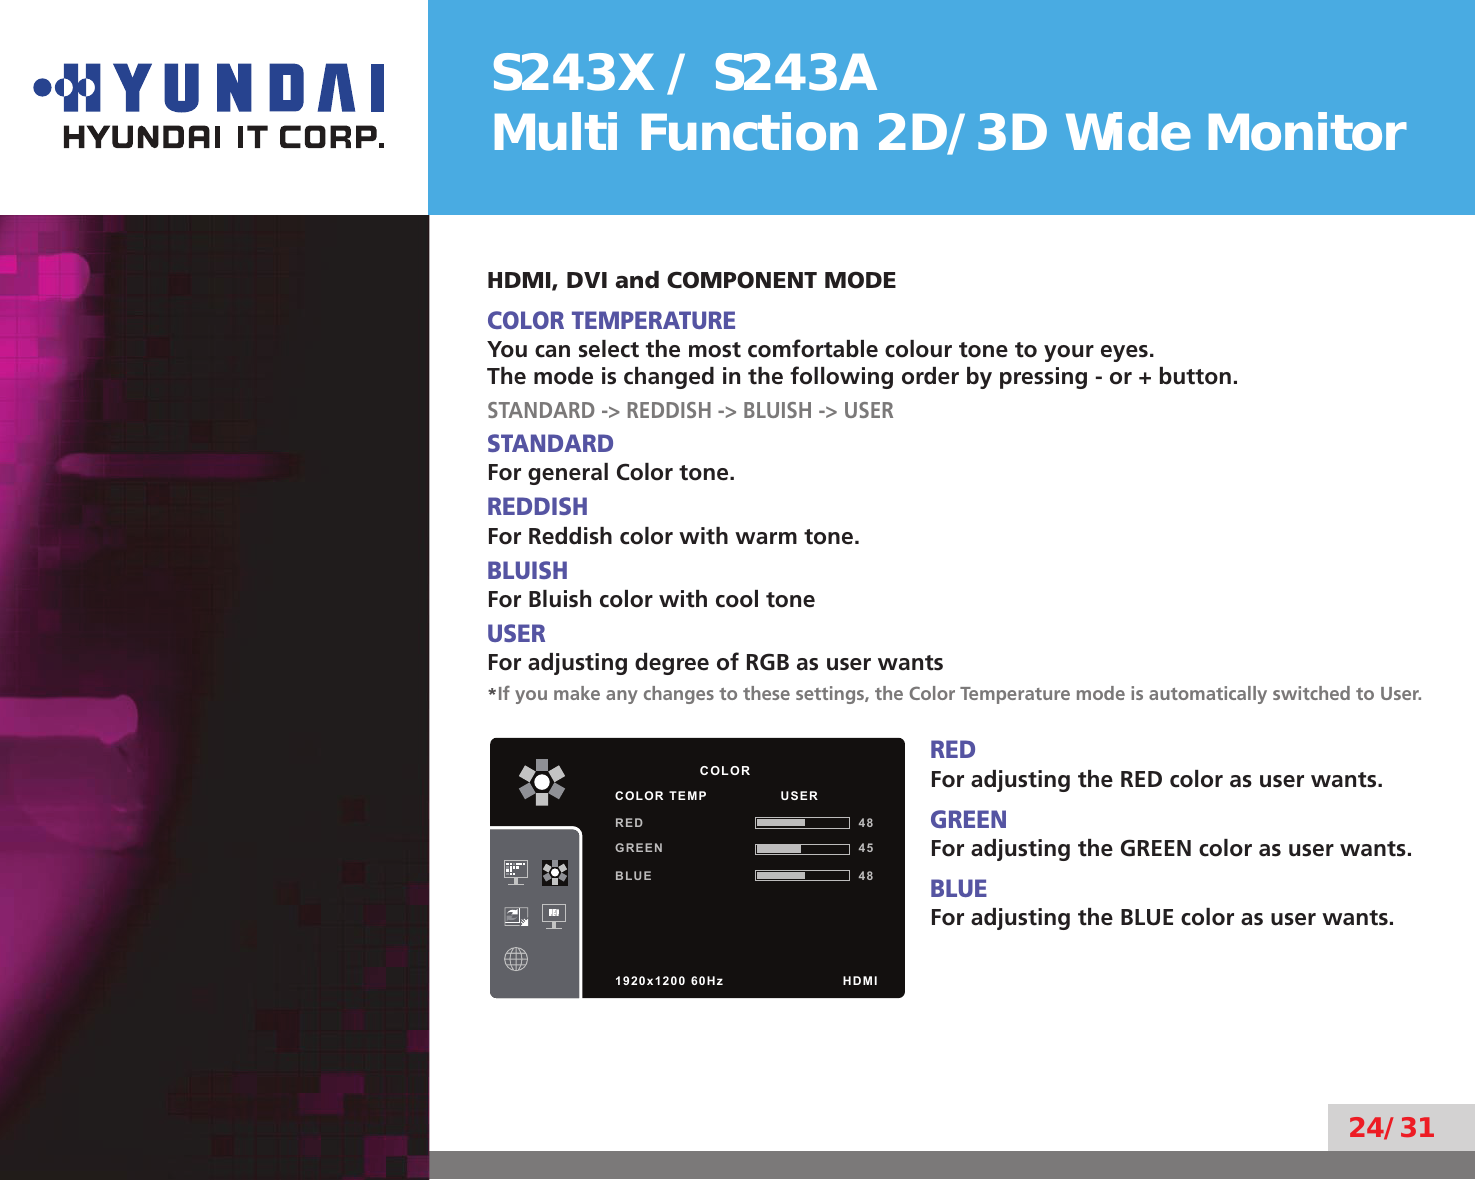 S243X / S243AMulti Function 2D/3D Wide Monitor24/31HDMI, DVI and COMPONENT MODECOLOR TEMPERATUREYou can select the most comfortable colour tone to your eyes.The mode is changed in the following order by pressing - or + button.STANDARD -&gt; REDDISH -&gt; BLUISH -&gt; USERSTANDARDFor general Color tone.REDDISHFor Reddish color with warm tone.BLUISHFor Bluish color with cool toneUSERFor adjusting degree of RGB as user wants*If you make any changes to these settings, the Color Temperature mode is automatically switched to User.REDFor adjusting the RED color as user wants.GREENFor adjusting the GREEN color as user wants.BLUEFor adjusting the BLUE color as user wants.          COLORCOLOR TEMP                USERRED 48GREEN 45BLUE 481920x1200 60Hz              HDMI